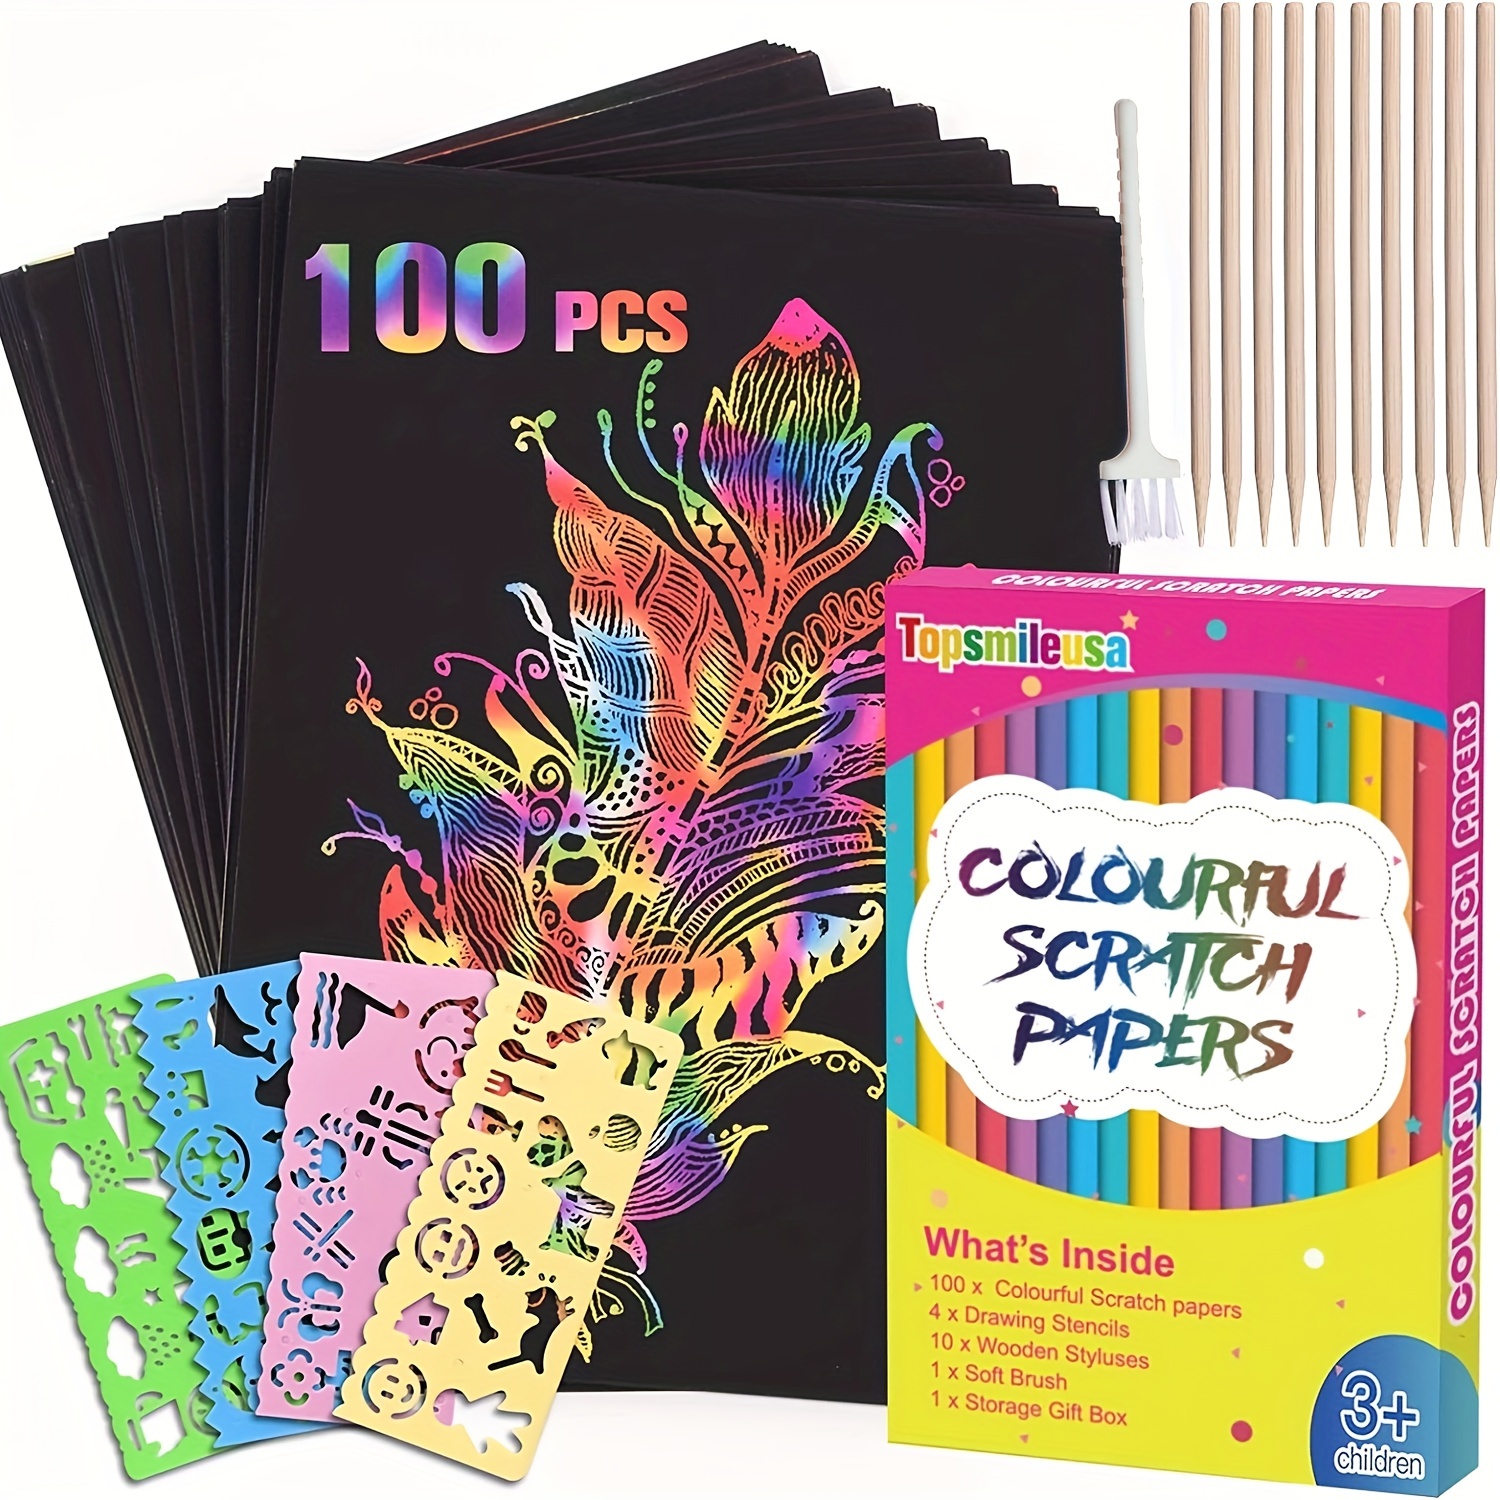 Jeexi Scratch Paper Art Set for Kids, 107pc Rainbow Card Scratch Art, Black  Scratch it Off Paper Crafts Notes with 10 Wooden Stylus and 4 Stencils for  Kids DIY Christmas Birthday Gift